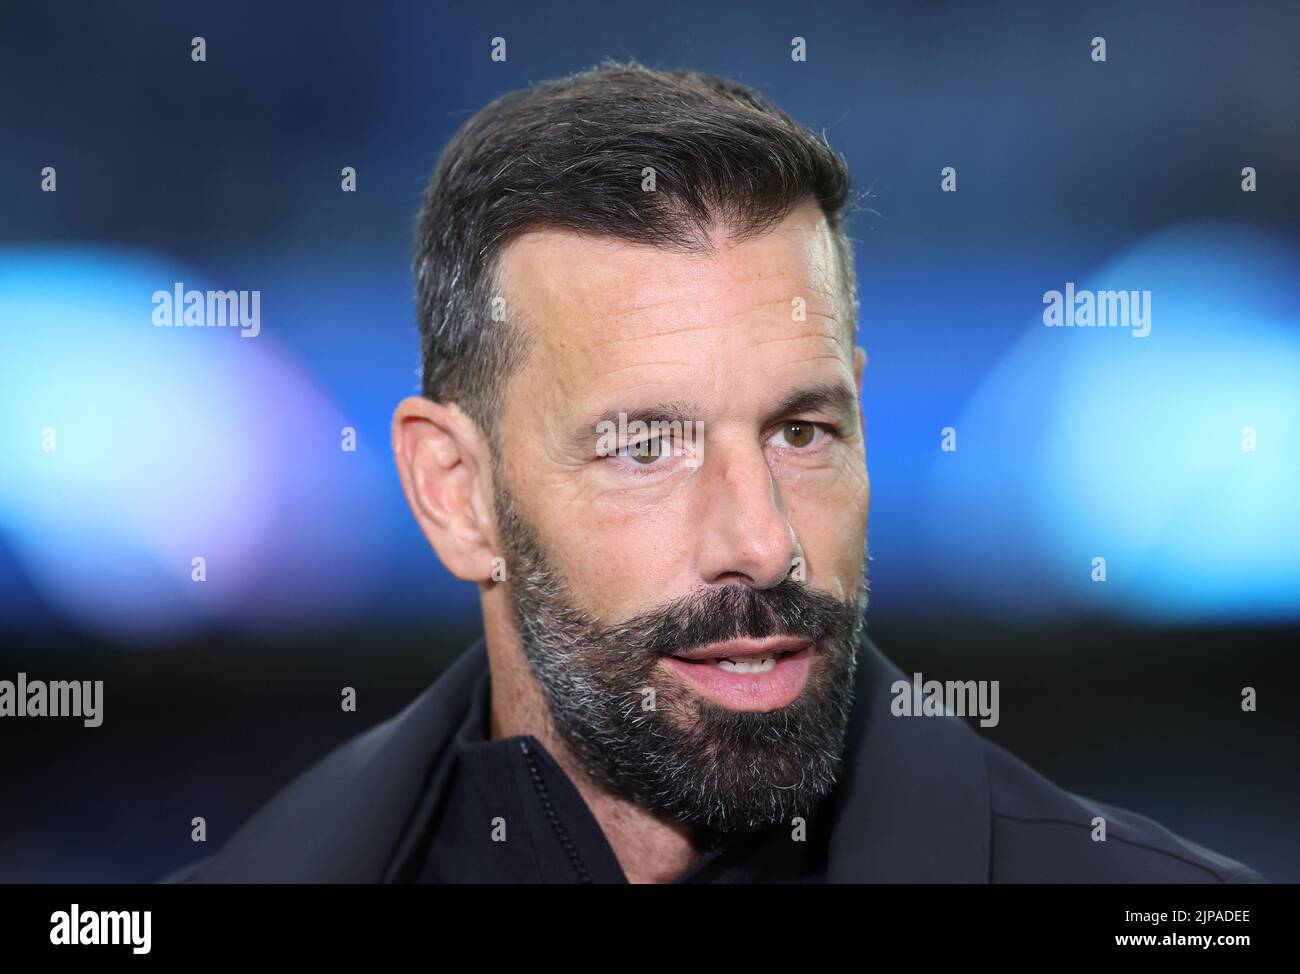 PSV Eindhoven manager Ruud van Nistelrooy interviewed before the Champions League qualifying match at Ibrox, Glasgow. Picture date: Tuesday August 16, 2022. Stock Photo